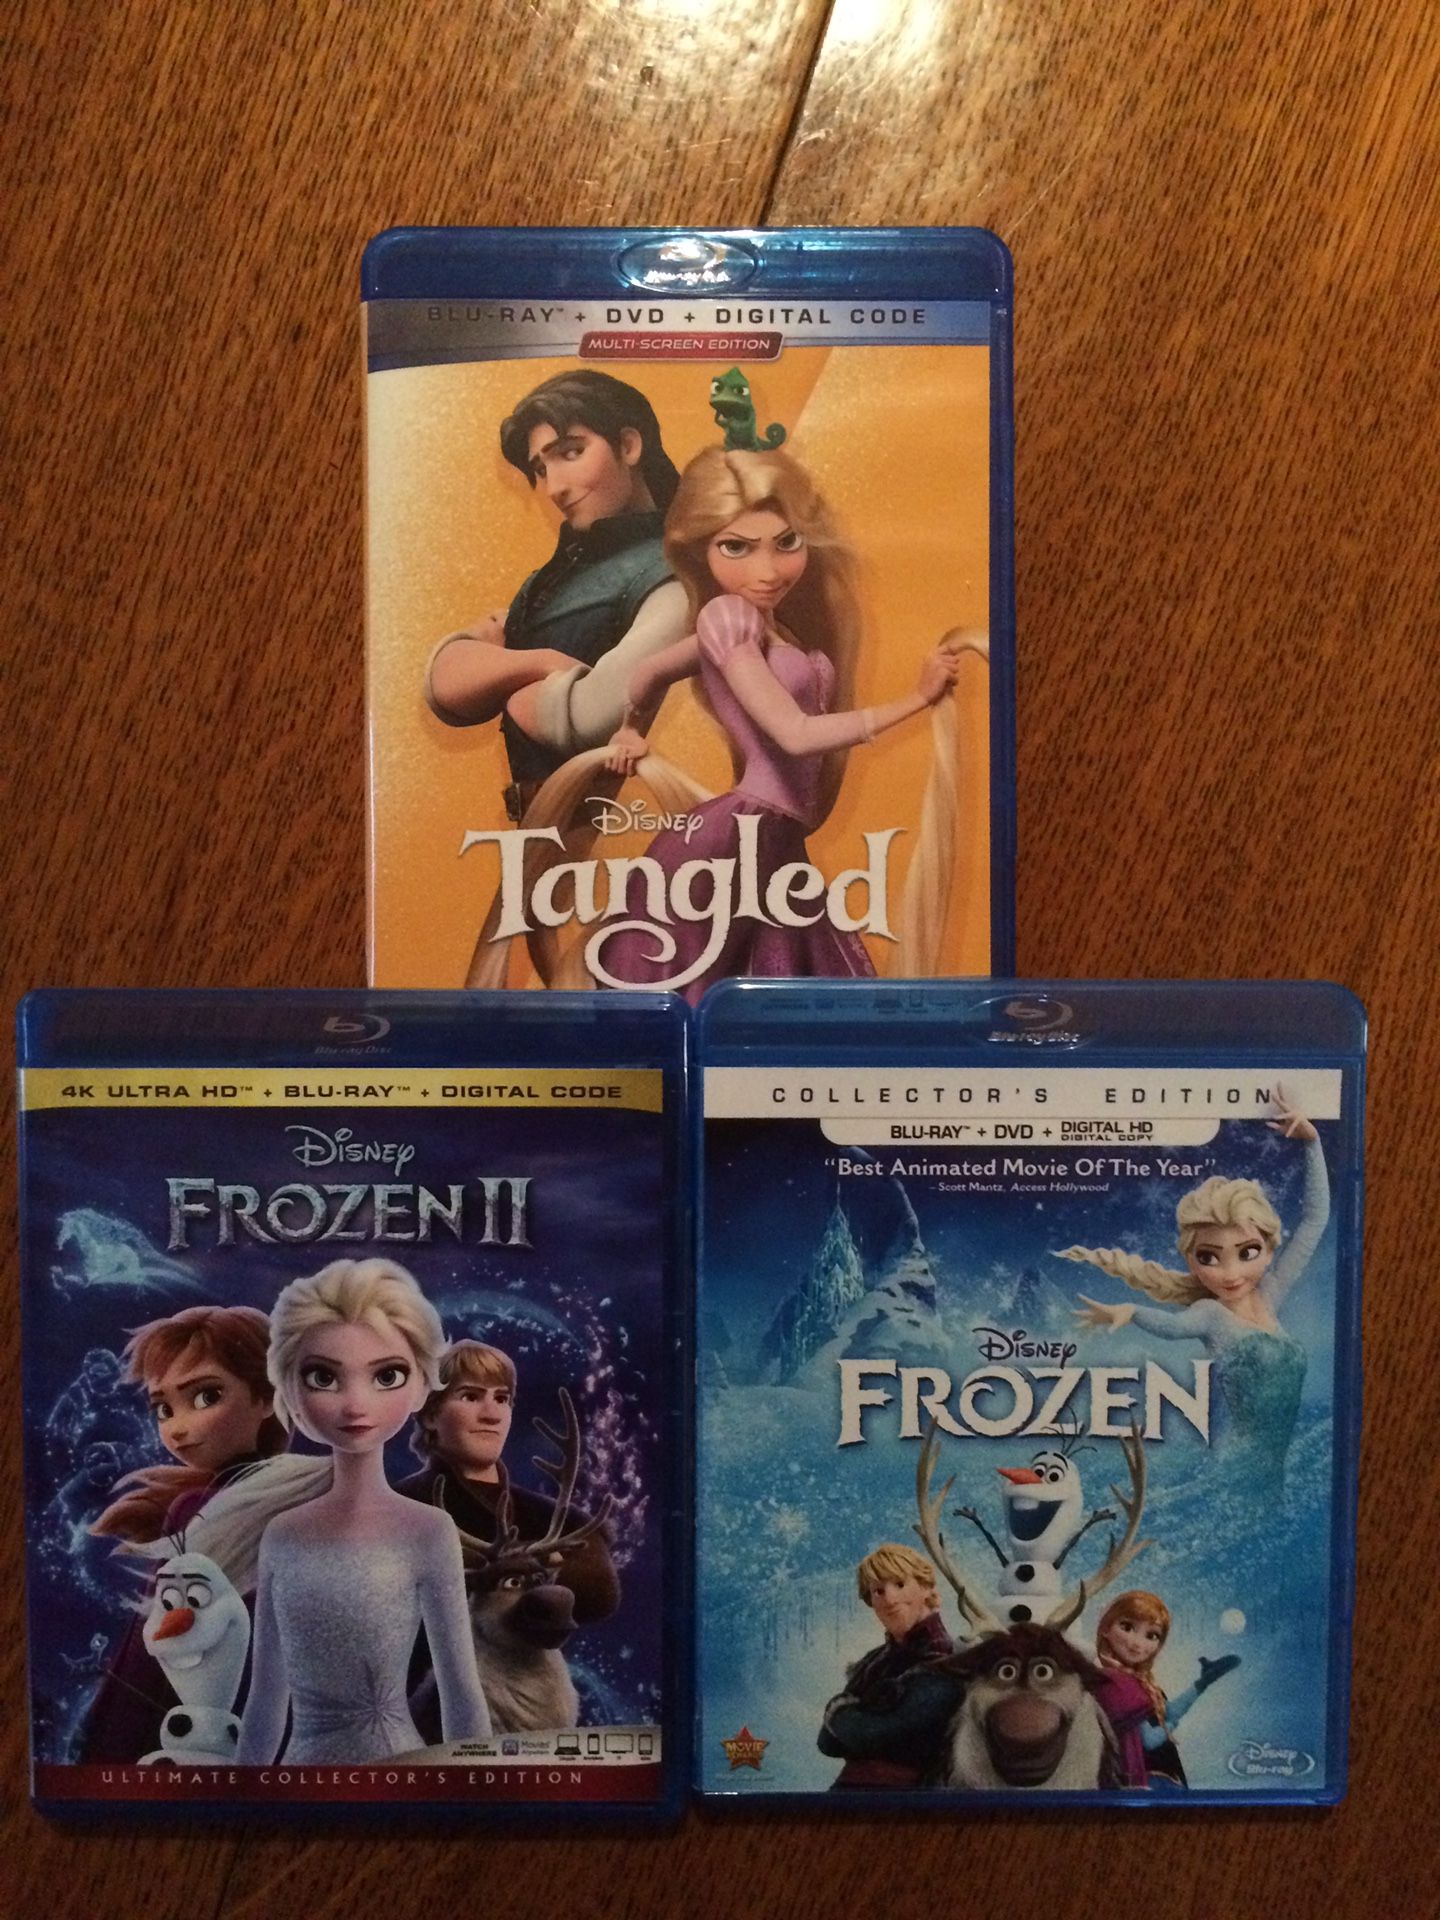 Frozen 1-2 and Tangled Blu-ray, Disney Marvel DC Harry Potter the Star Wars movies 3D Bluray and dvd collectors